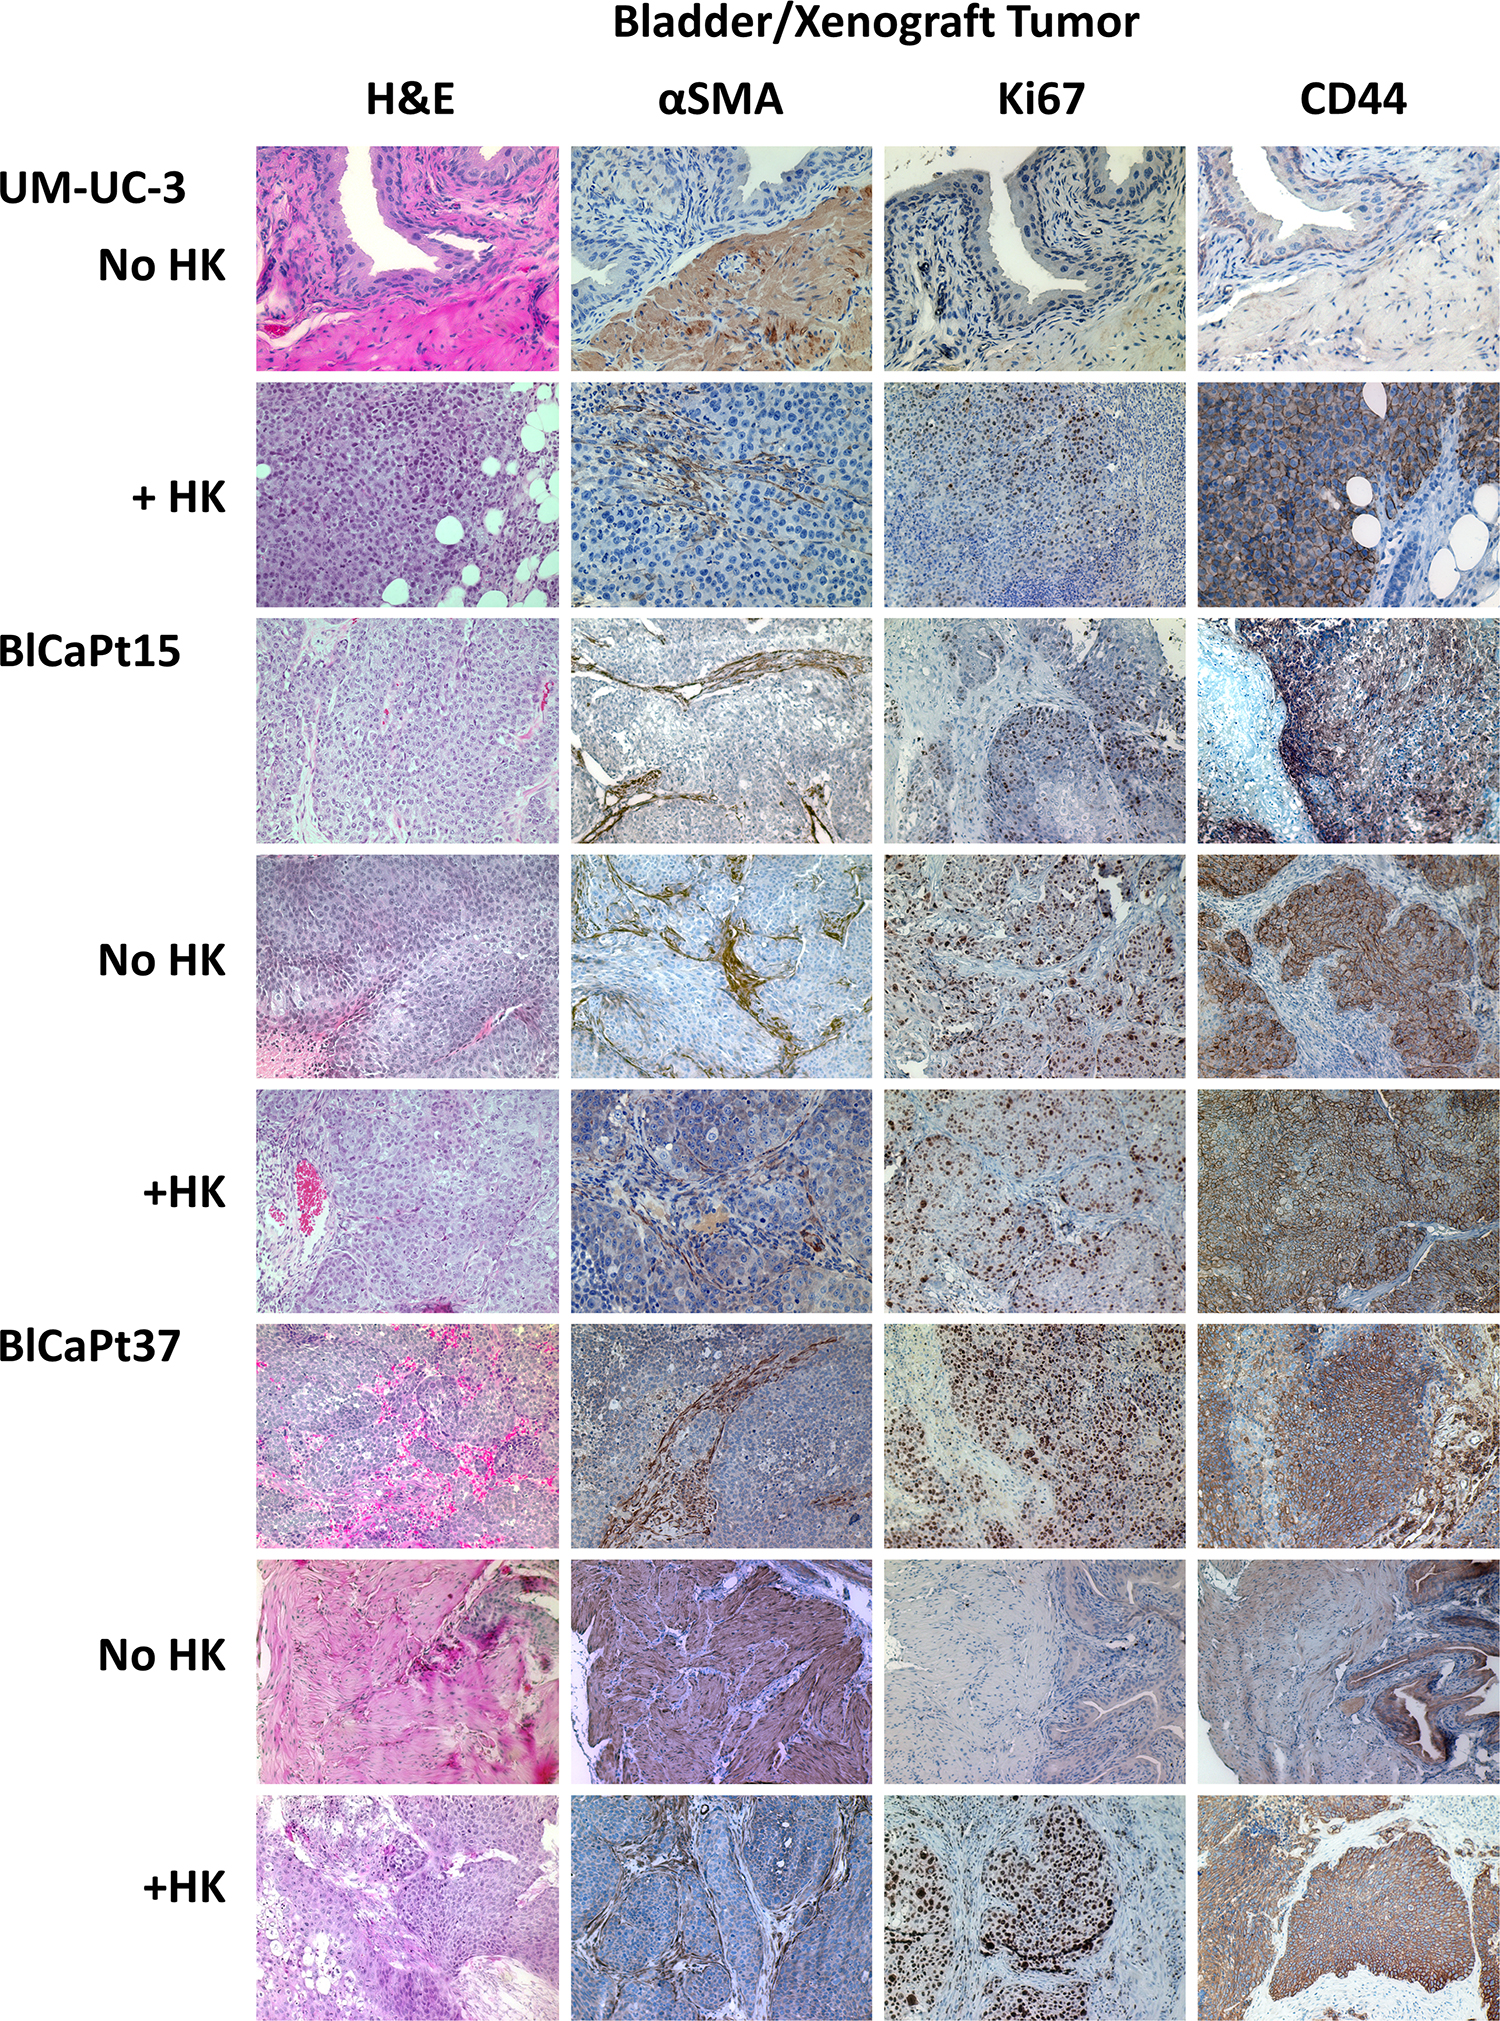 The IB model recapitulated the architectural and molecular expression characteristics of UCC patient primary tumors.